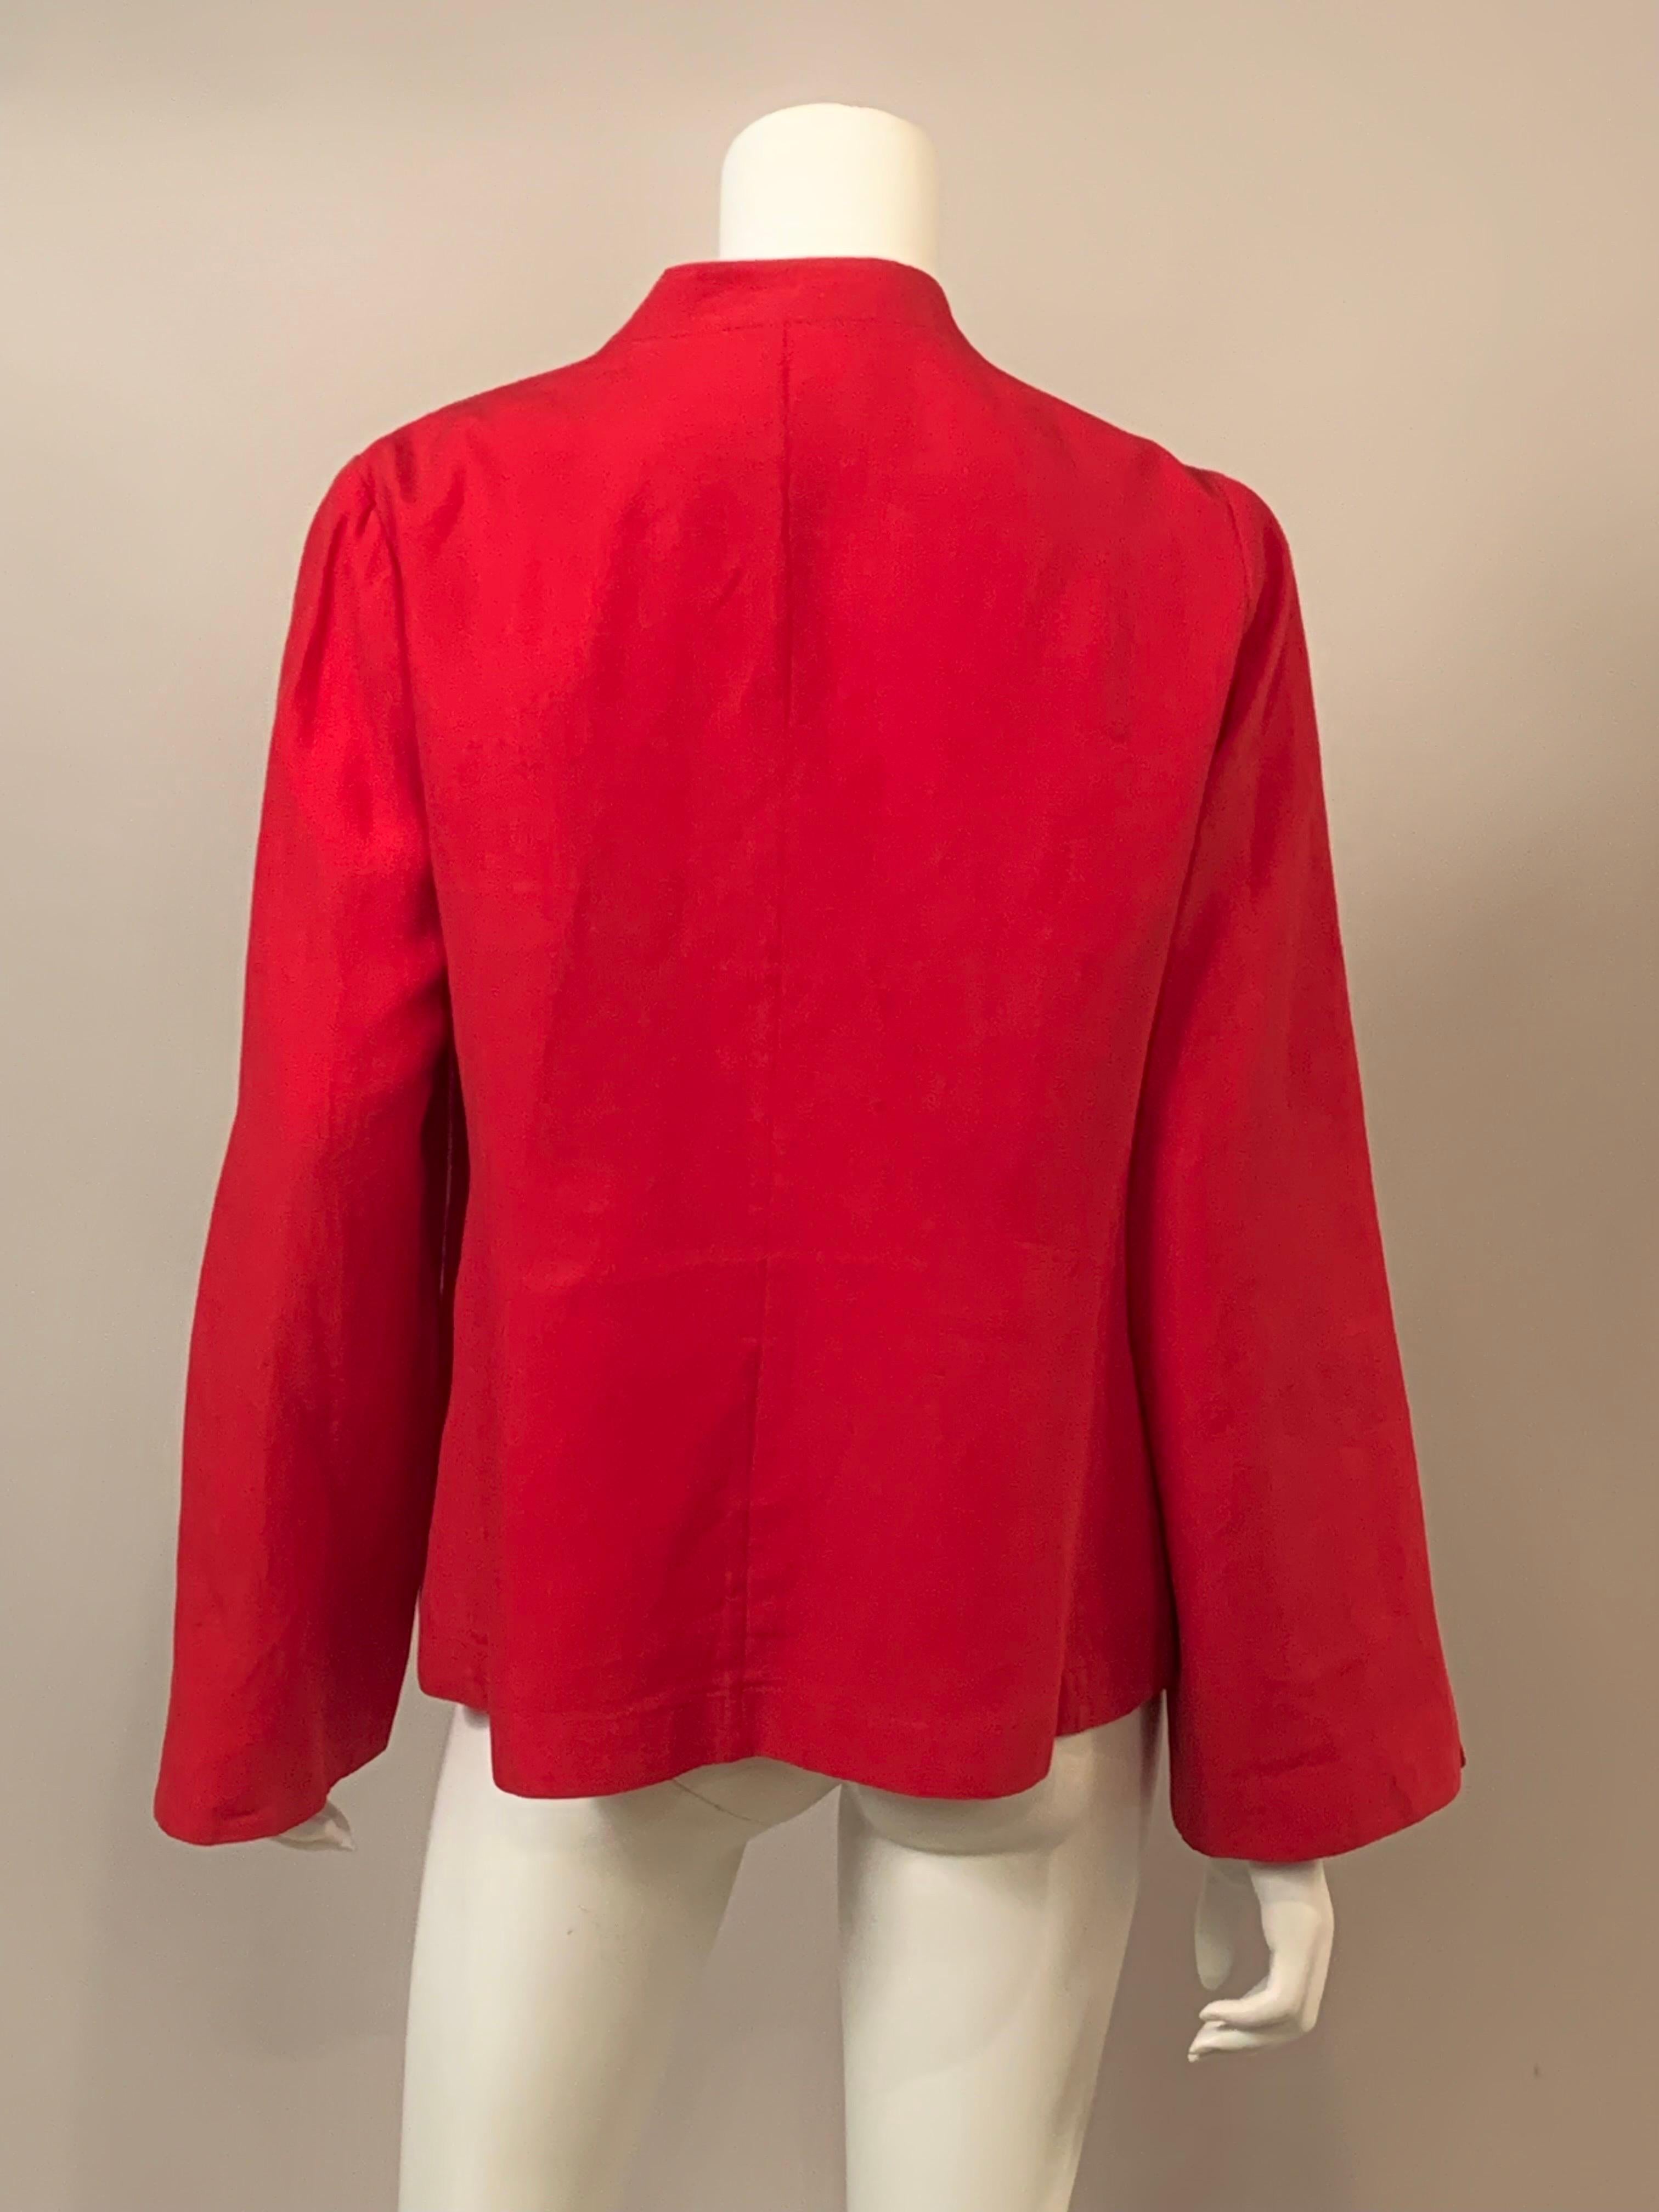 Giorgio Armani Red Linen Jacket In Excellent Condition For Sale In New Hope, PA